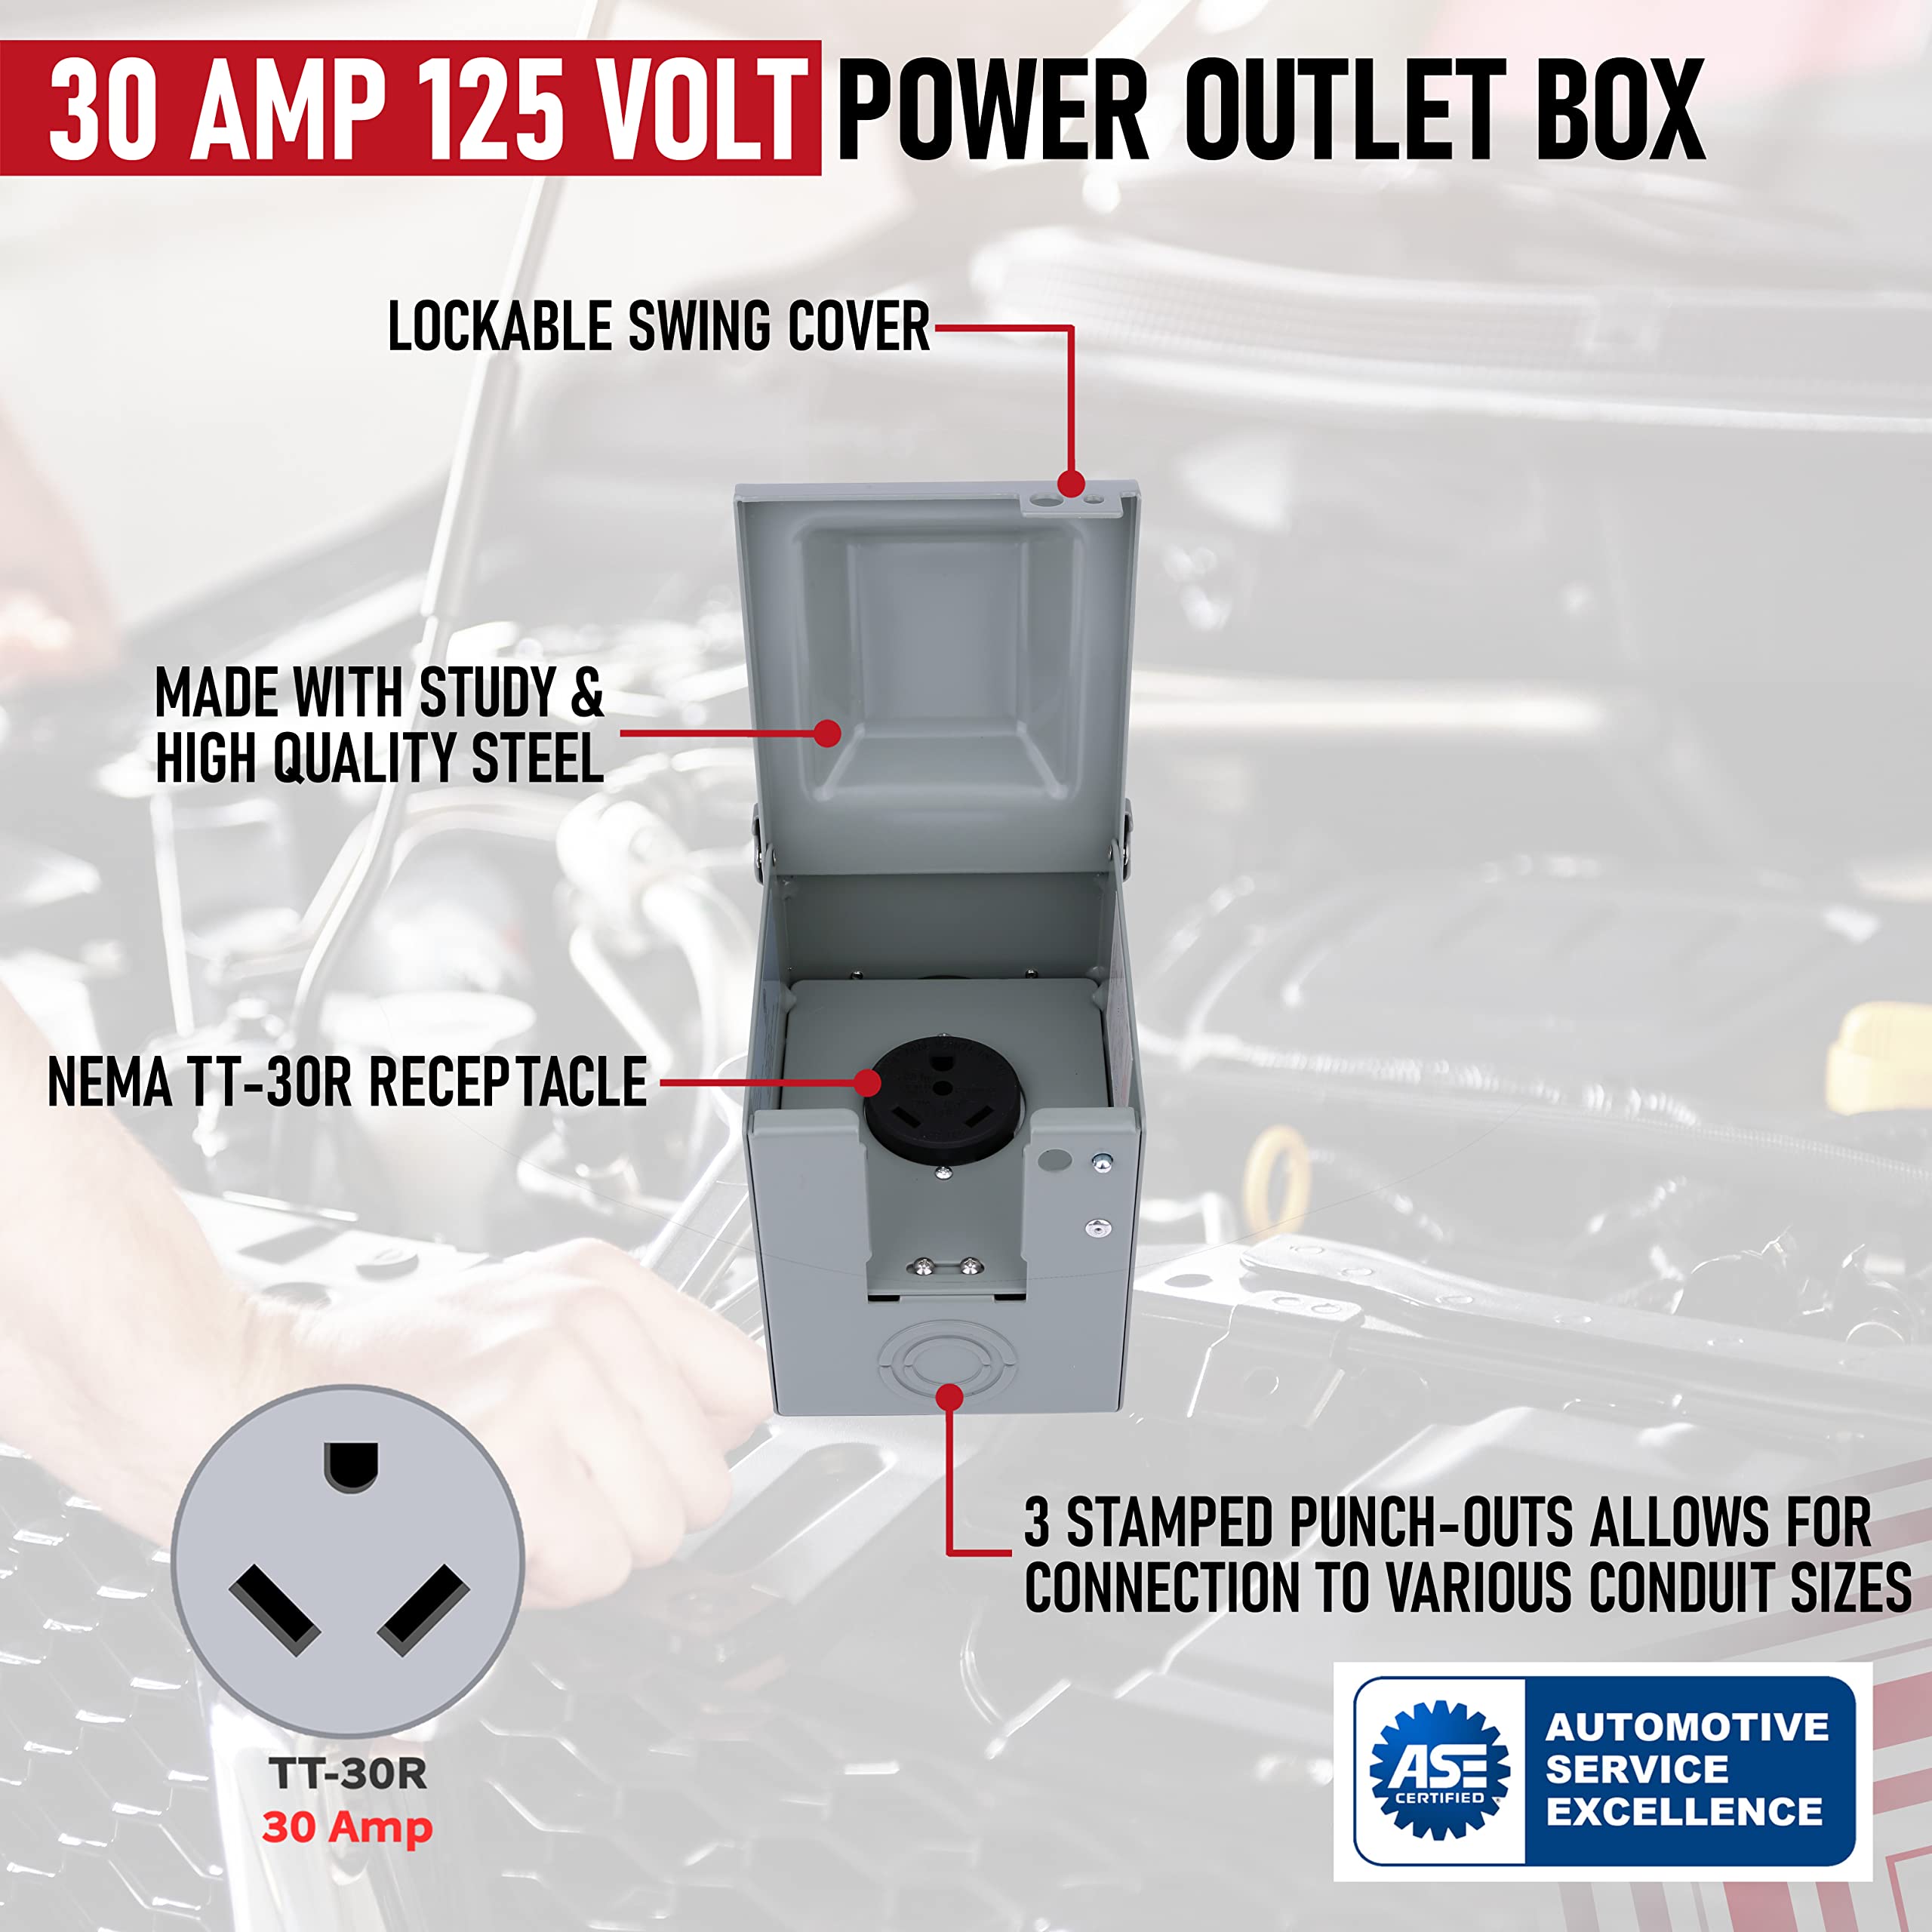 30 Amp 125 Volt Power Outlet Box, Enclosed Lockable - for RV, Campers, Travel Trailer, Motorhome, Electric Car, Generator - 3R Weatherproof Outdoor - NEMA TT-30R Receptacle Panel  - Like New